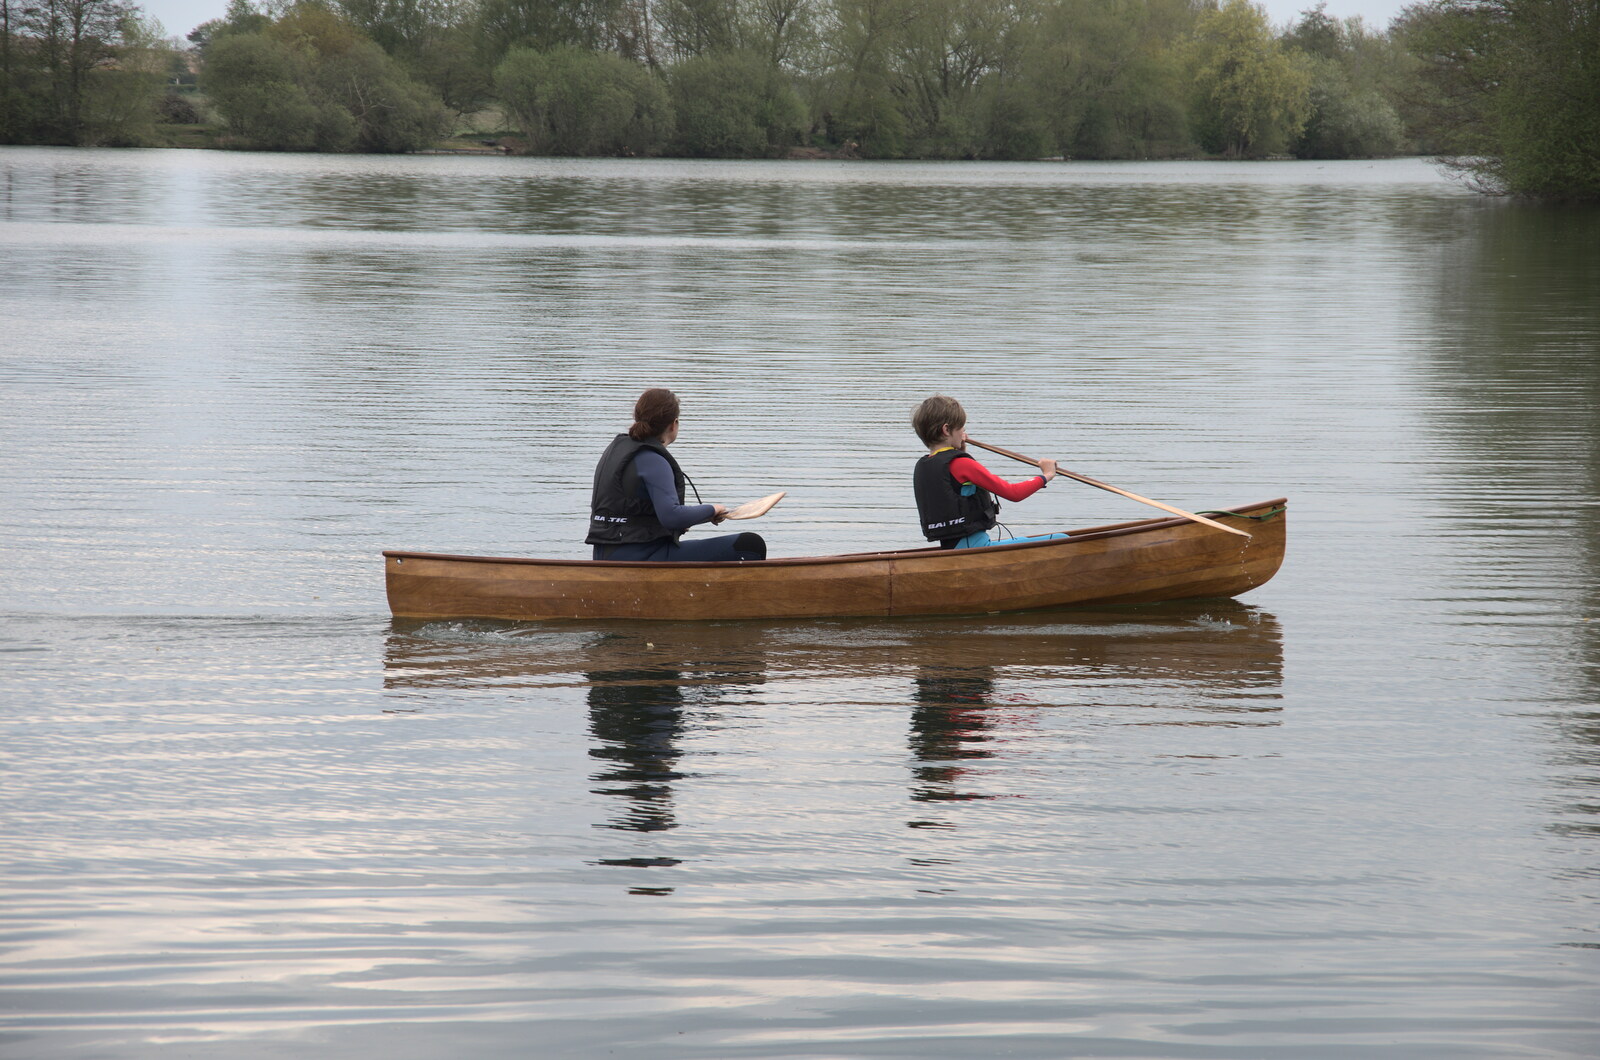 The Canoe's First Outing, Weybread Lake, Harleston - 1st May 2022: Isobel and Harry pootle around